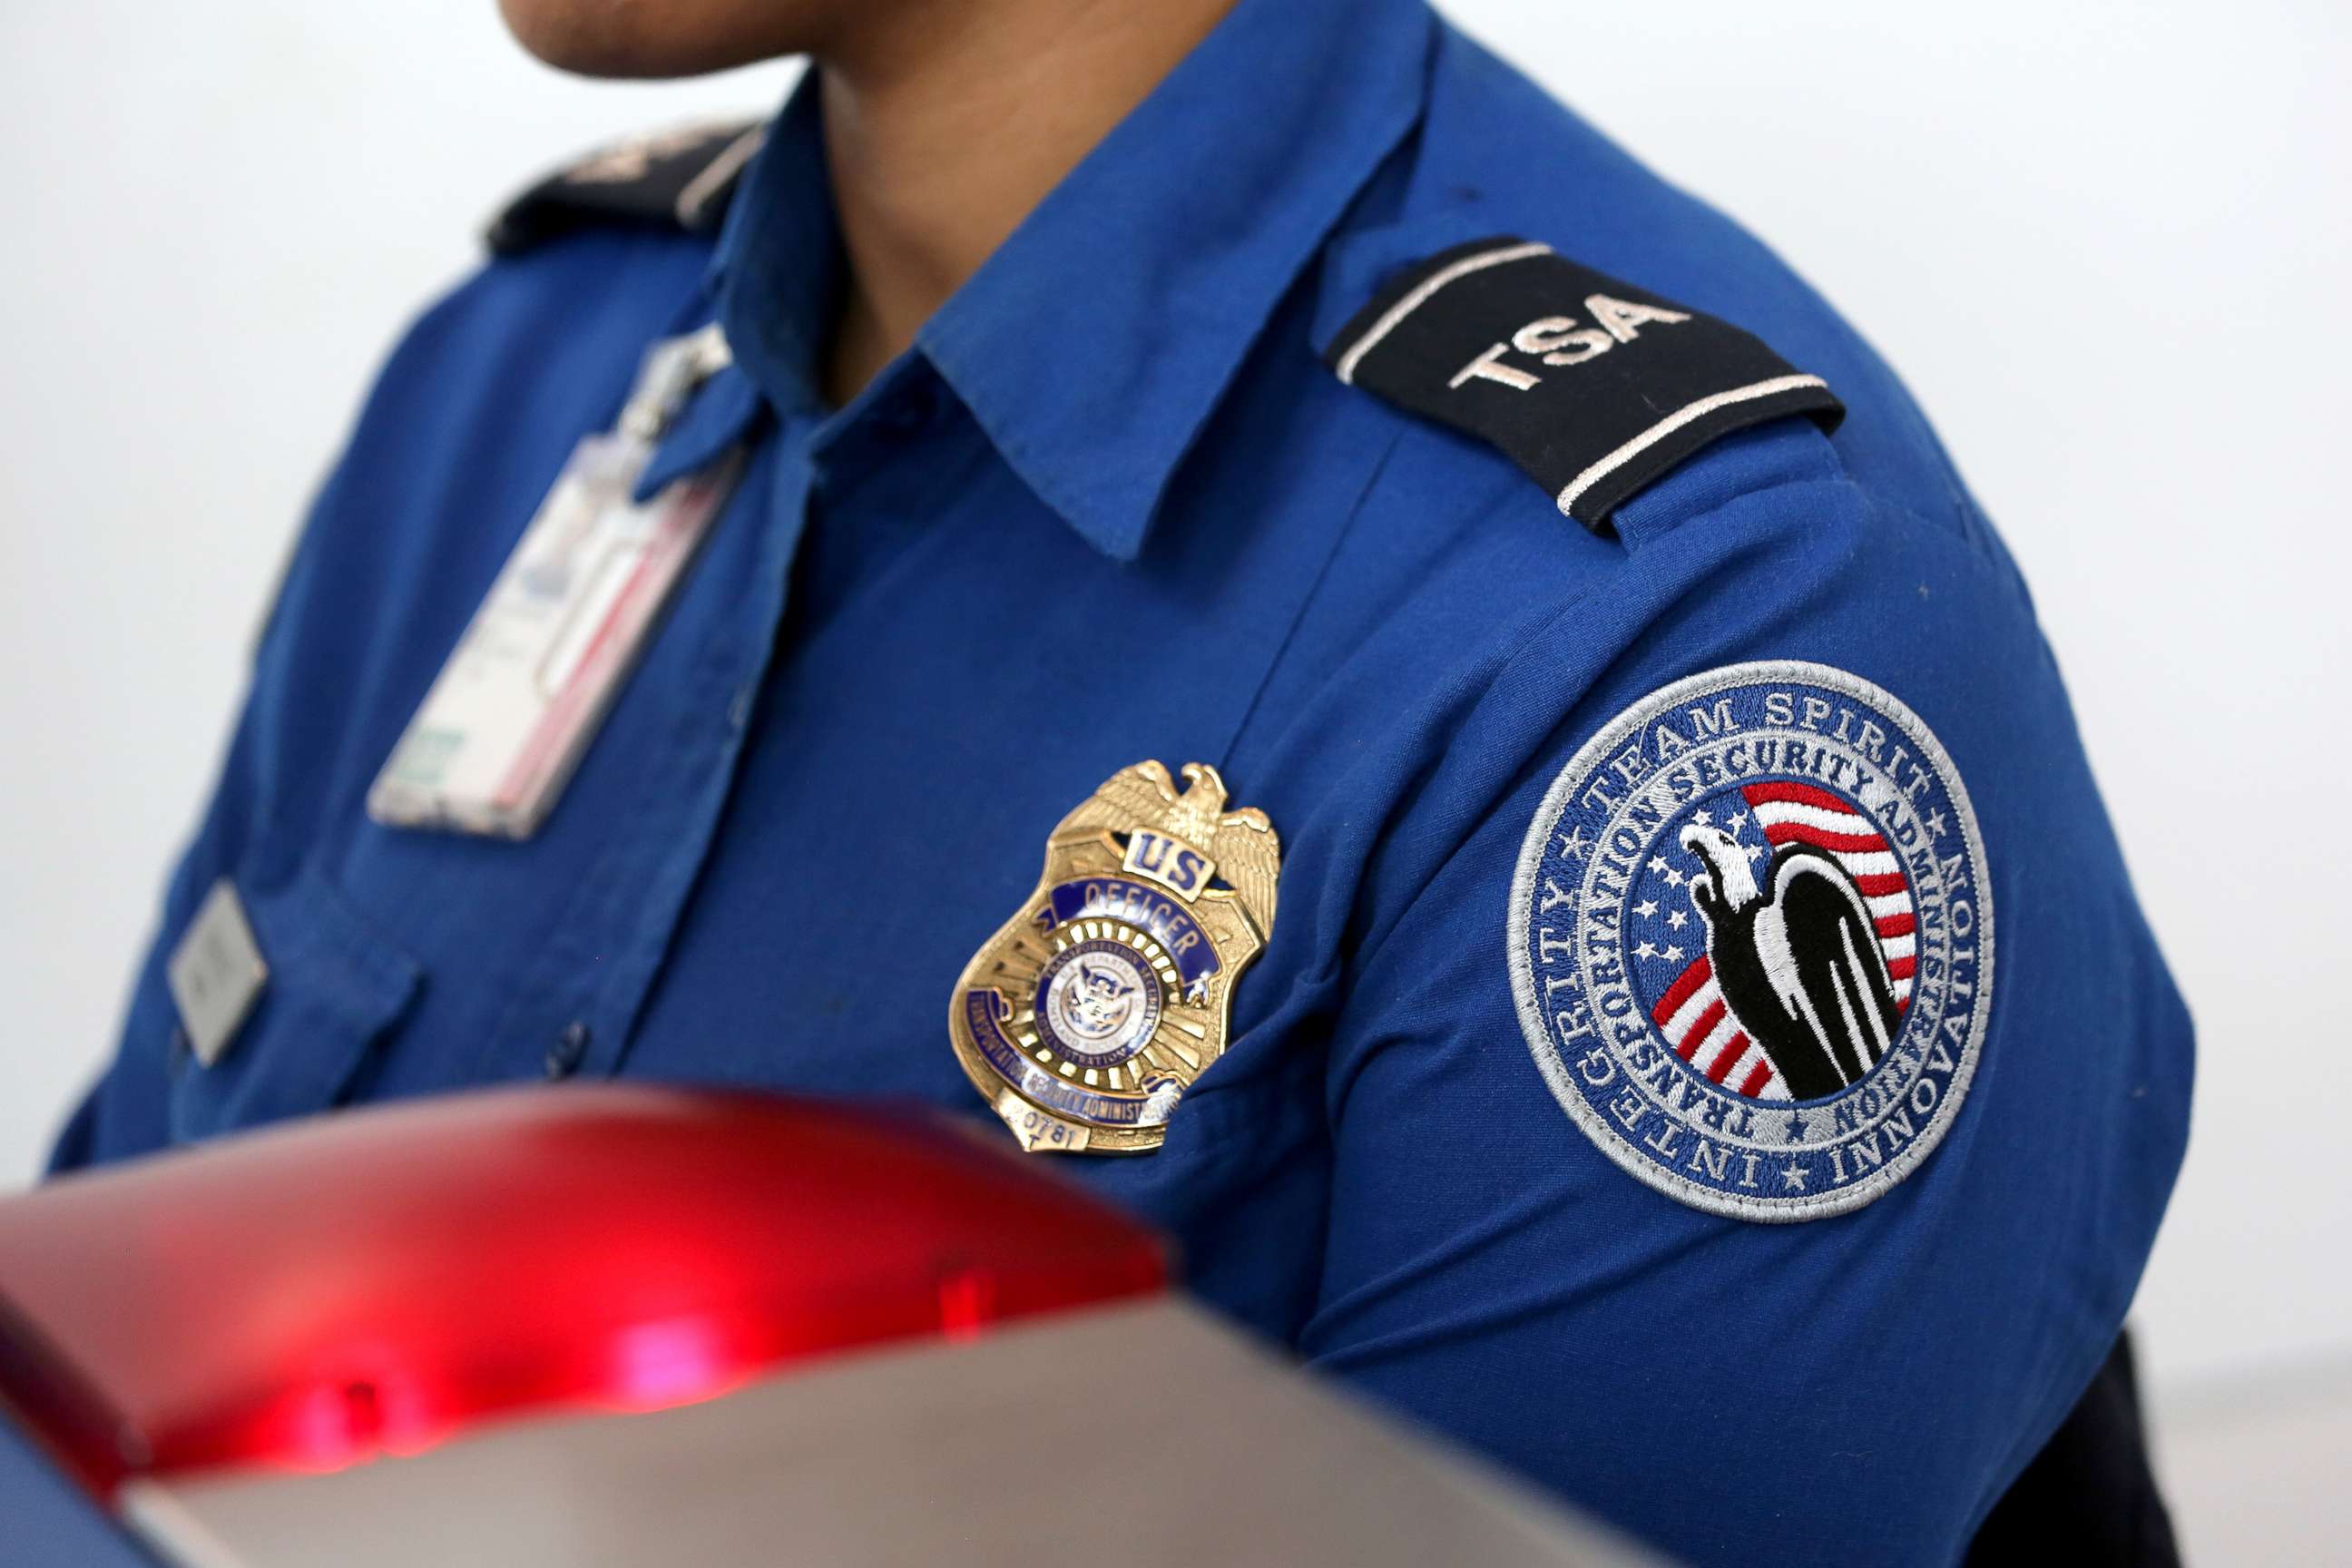 PHOTO: Transportation Security Administration (TSA) agents work at a check-point inside LaGuardia airport in New York, Jan. 27, 2014.